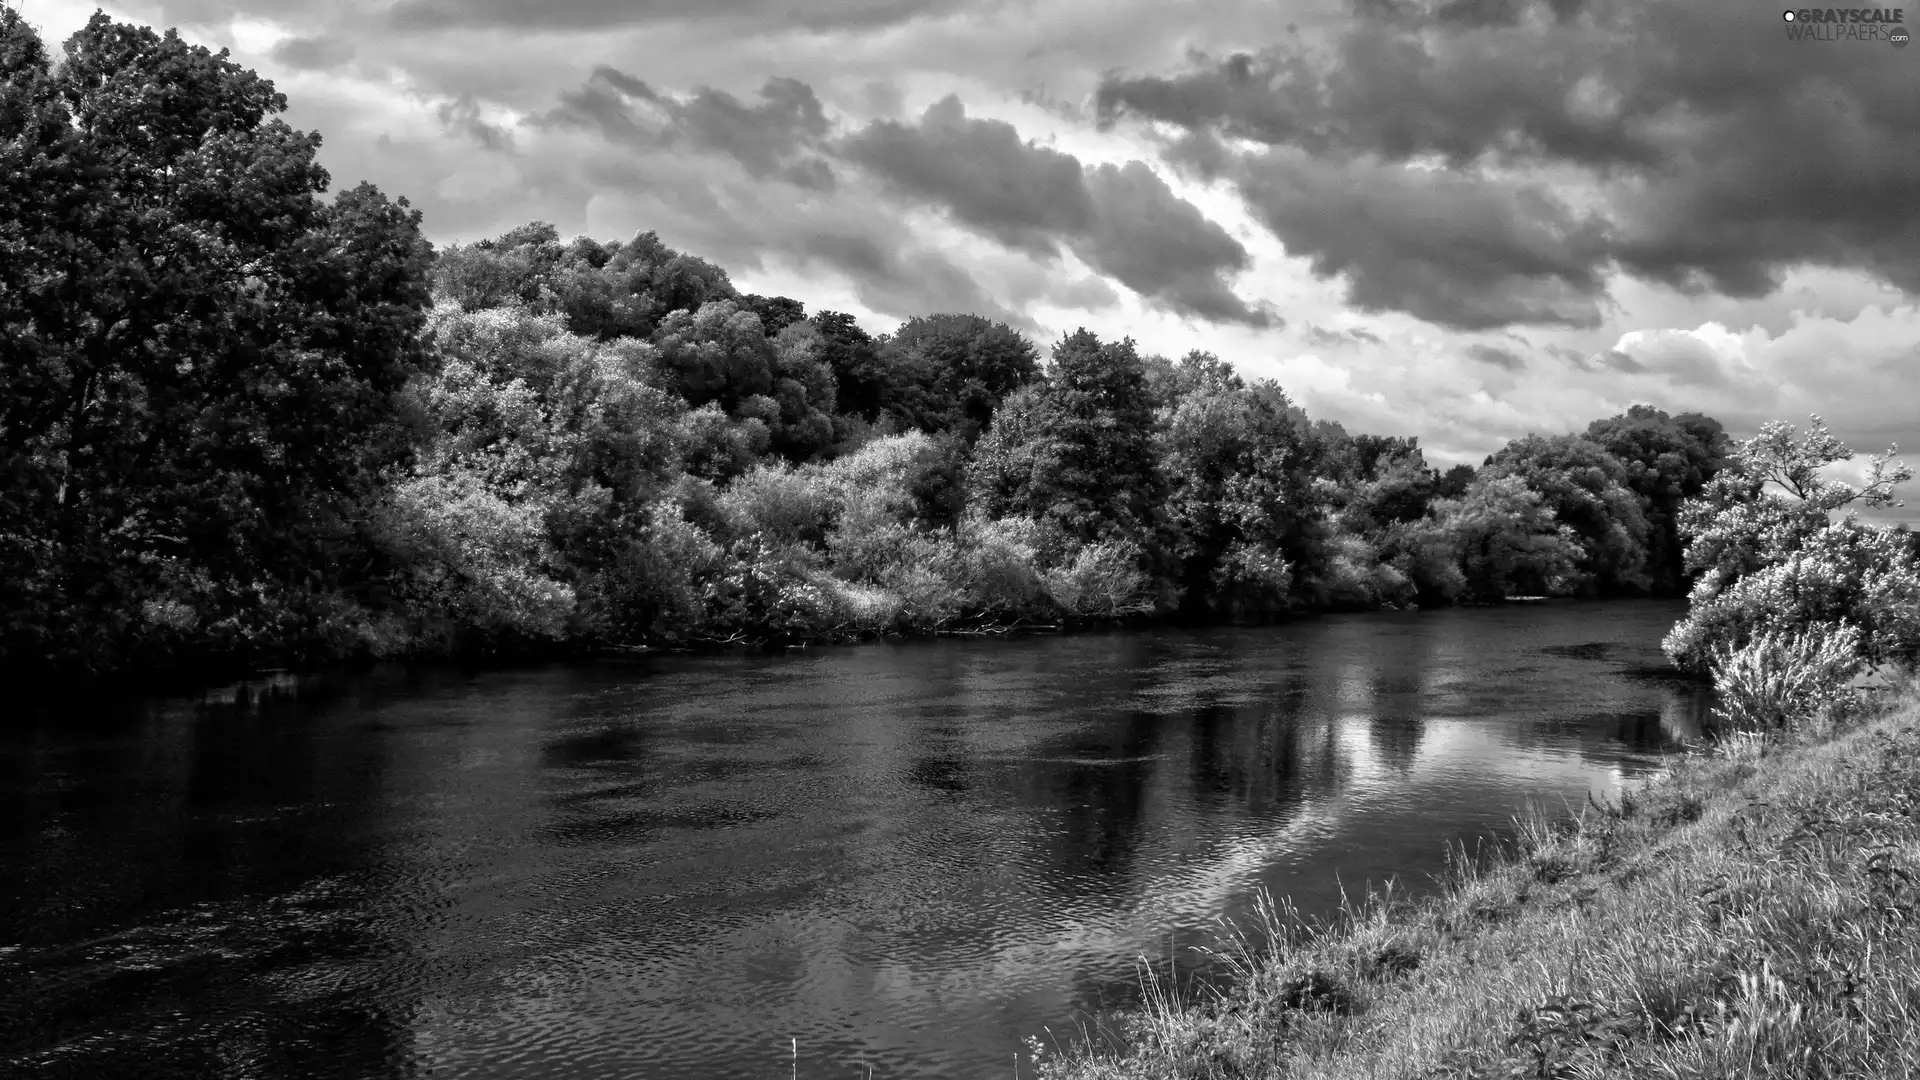 trees, viewes, River, grass, clouds